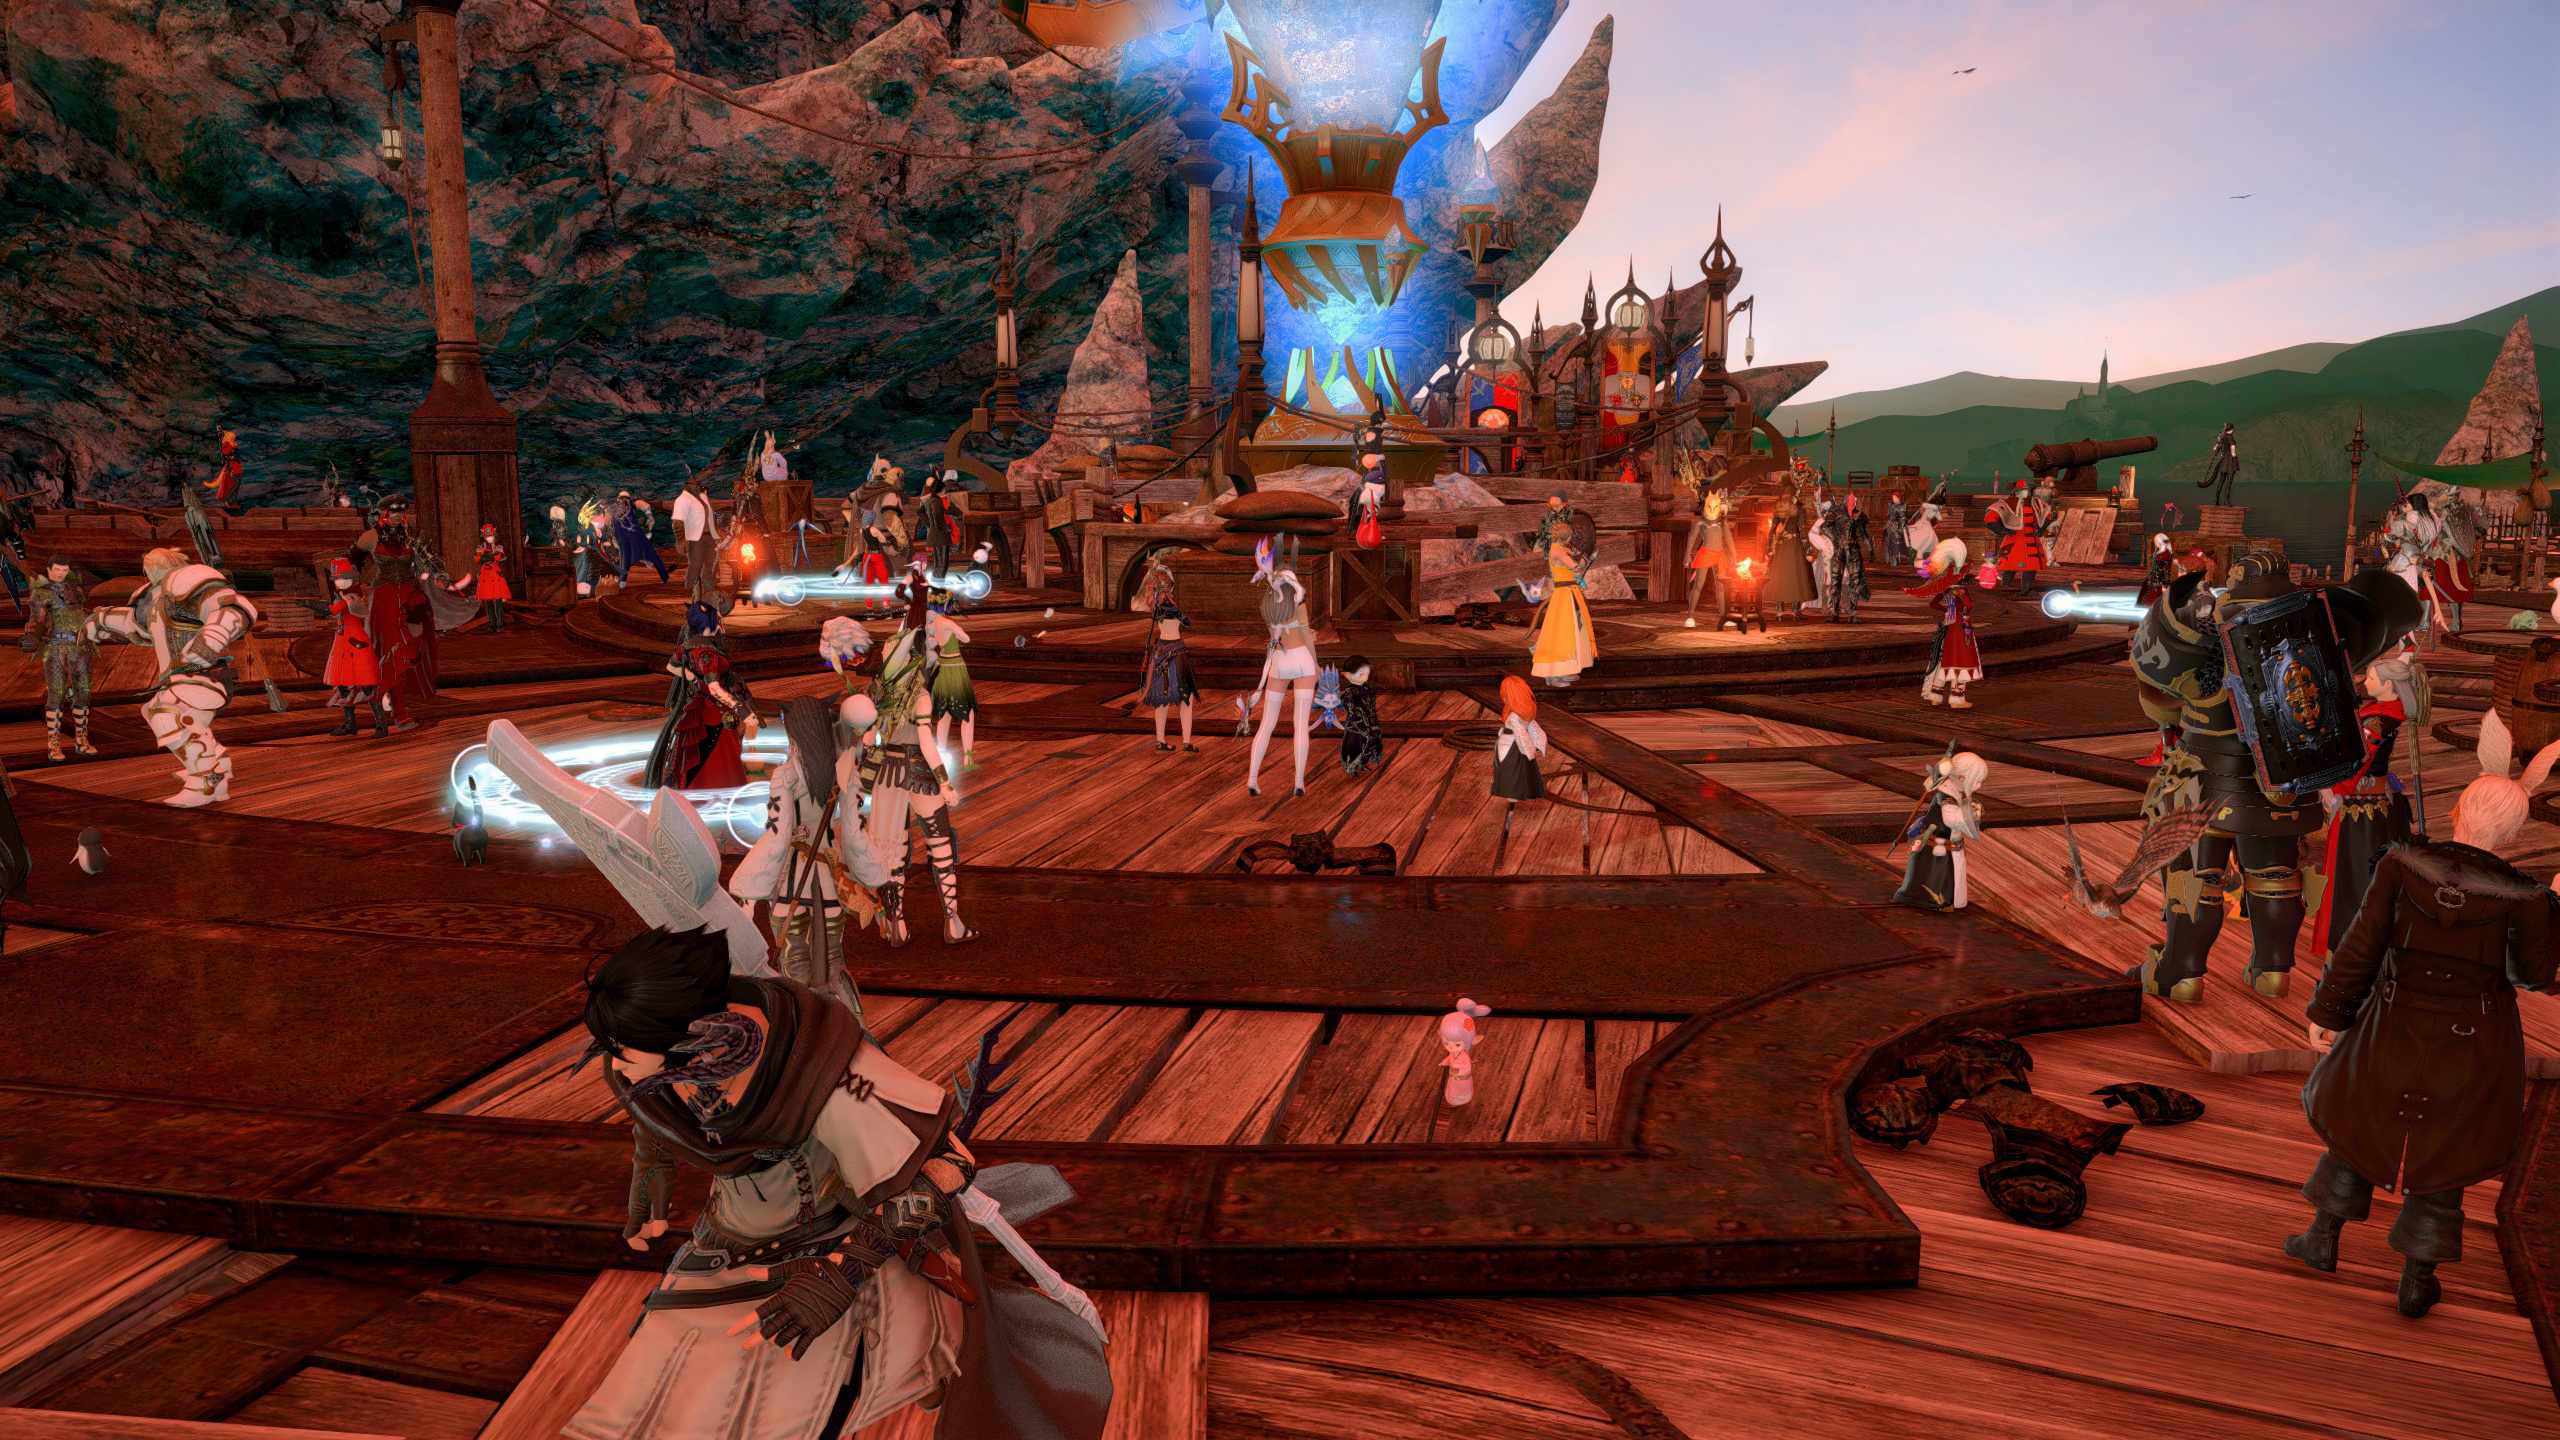 Hundreds of players gathered in Wolves' Den Pier in Final Fantasy 14.